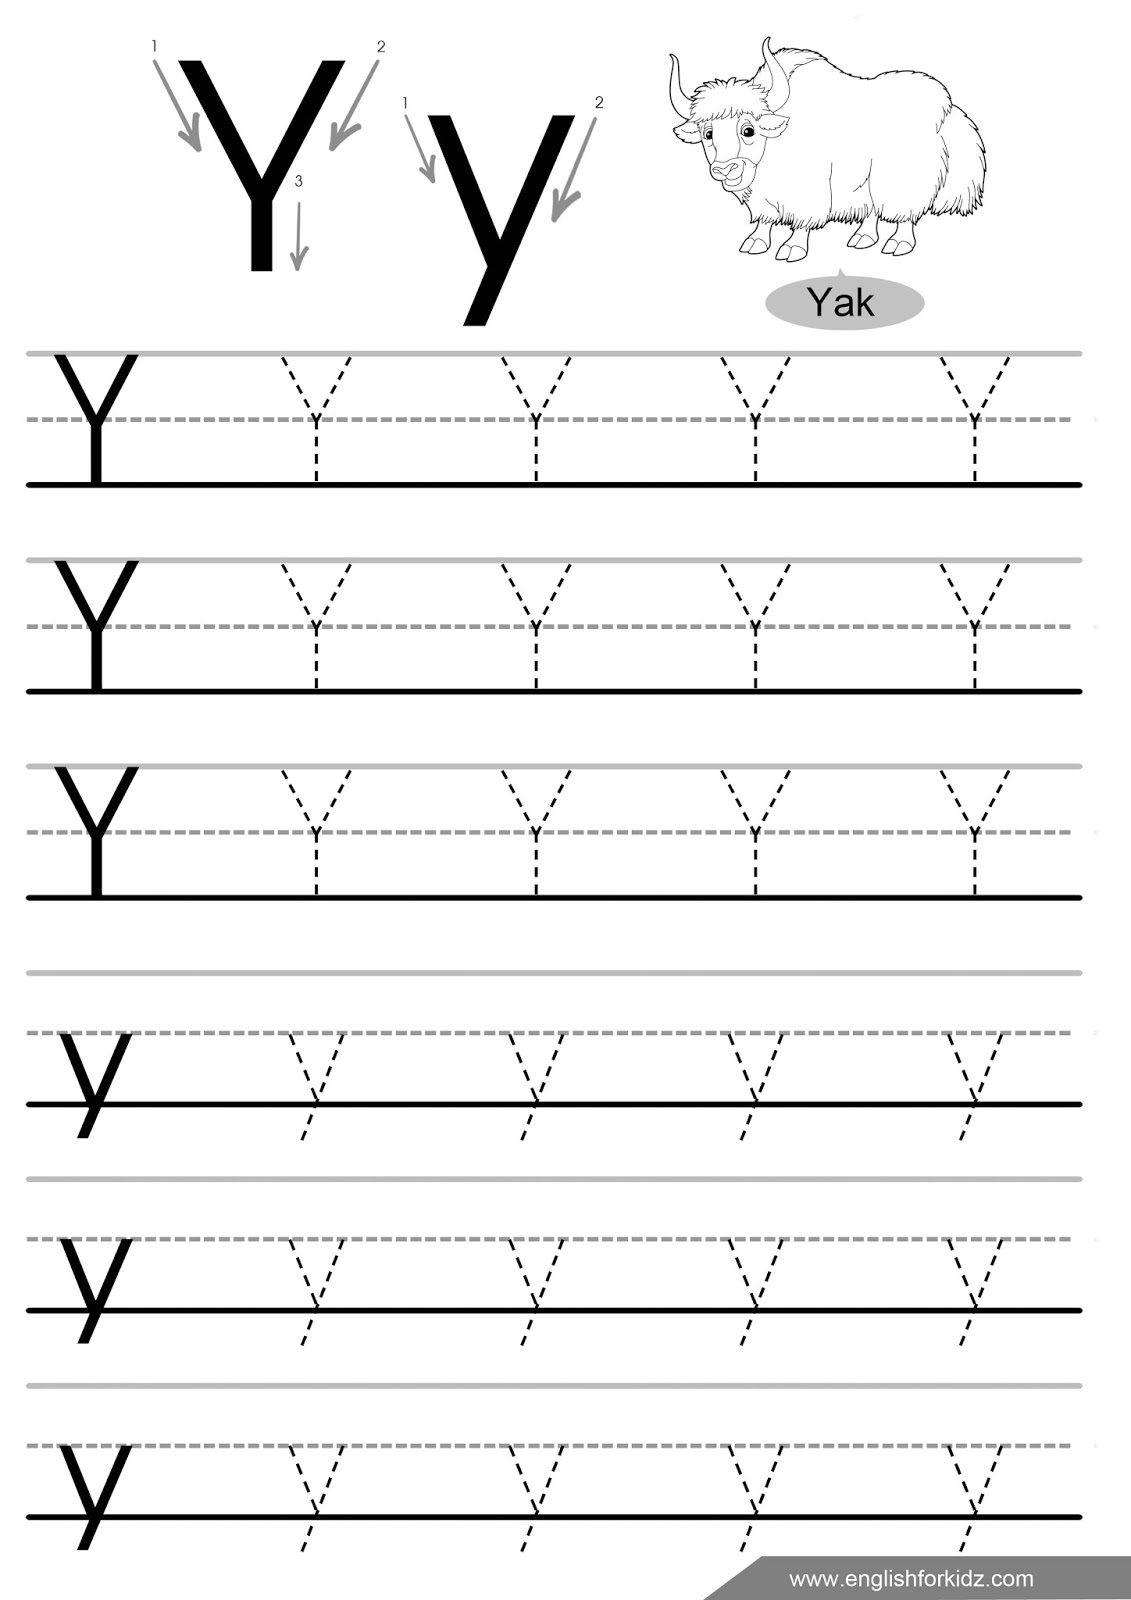 English for kids step by step letter y worksheets flash cards coloring pages